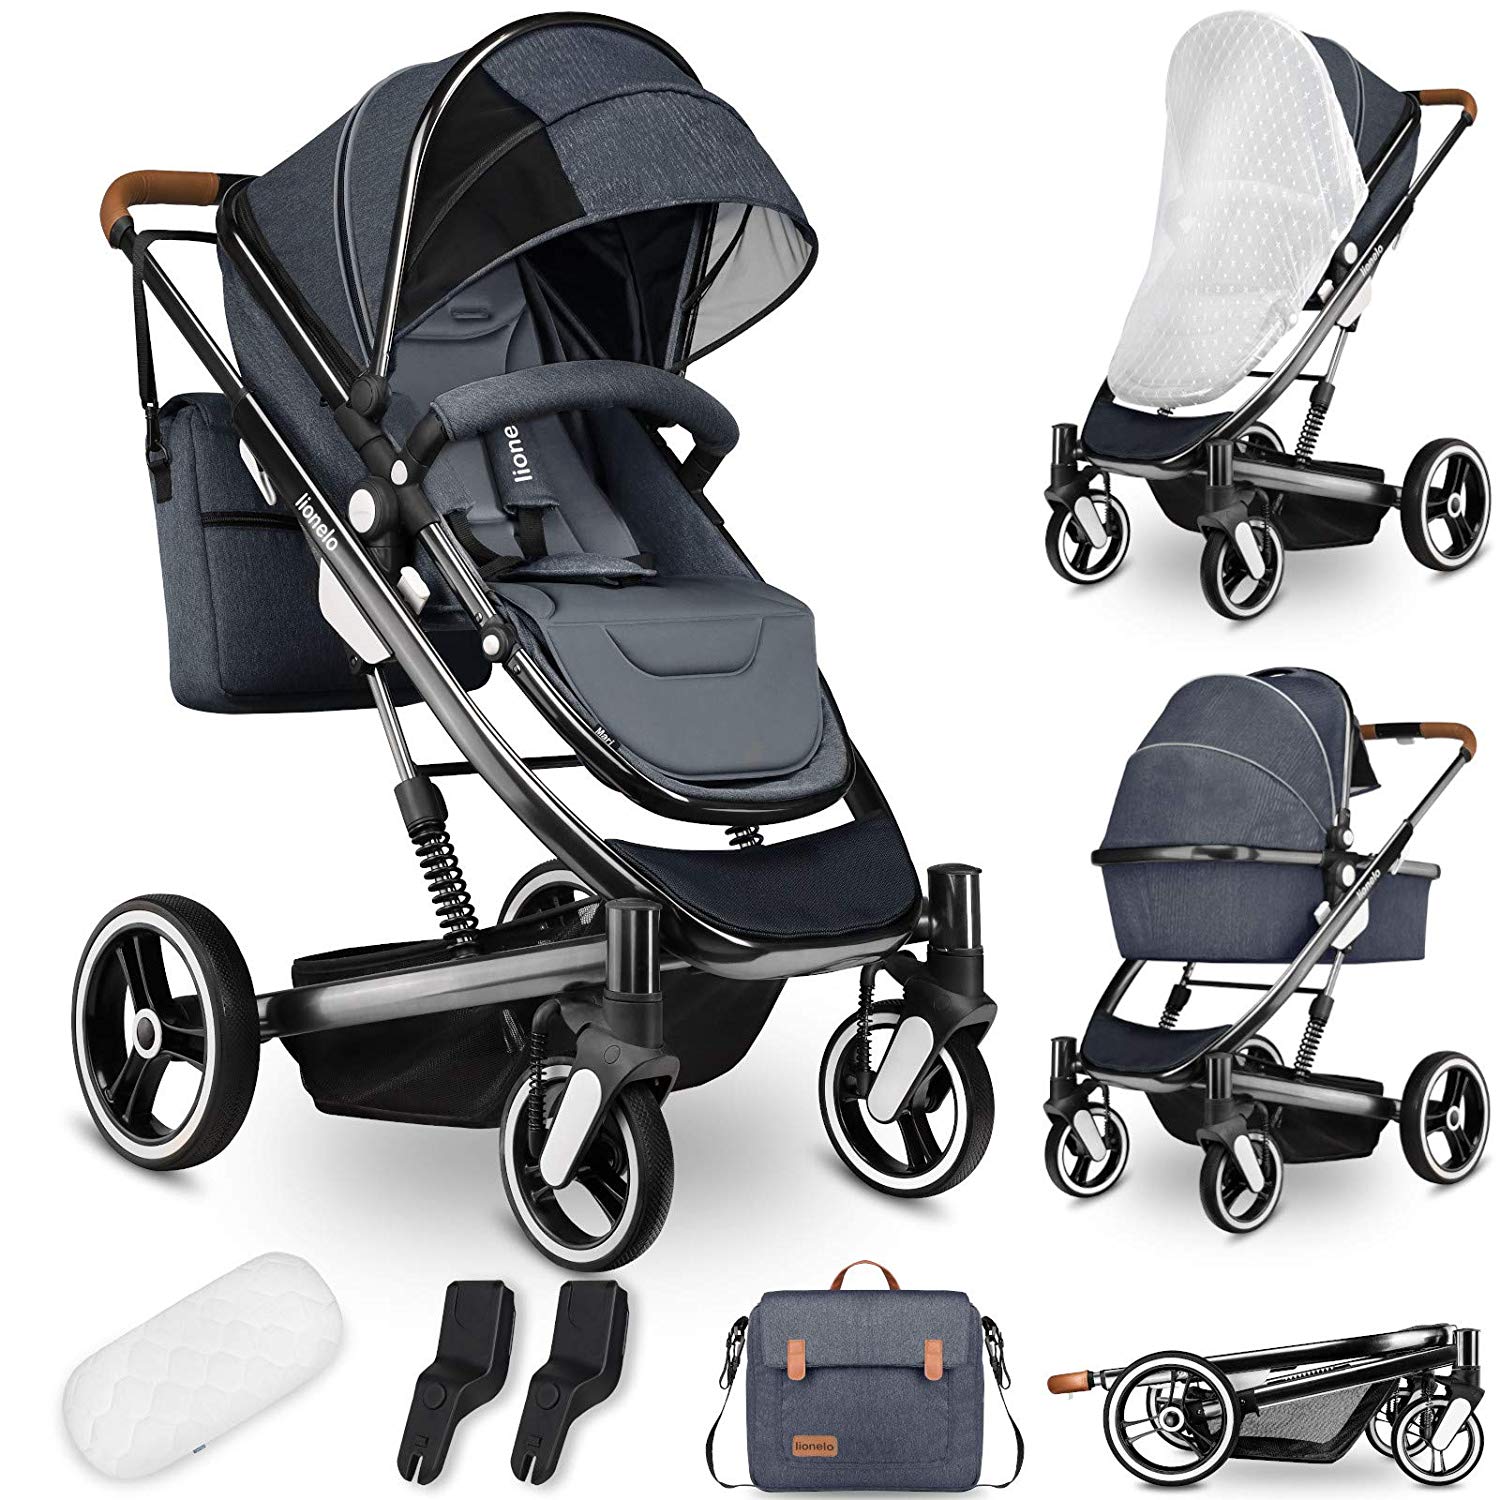 Lionelo Mari Pushchair 2 in 1 Combi Pram Set with Sporty Seat and Fixed Baby Bath Mattress Bag Mosquito Net Cover Universal Adaptor